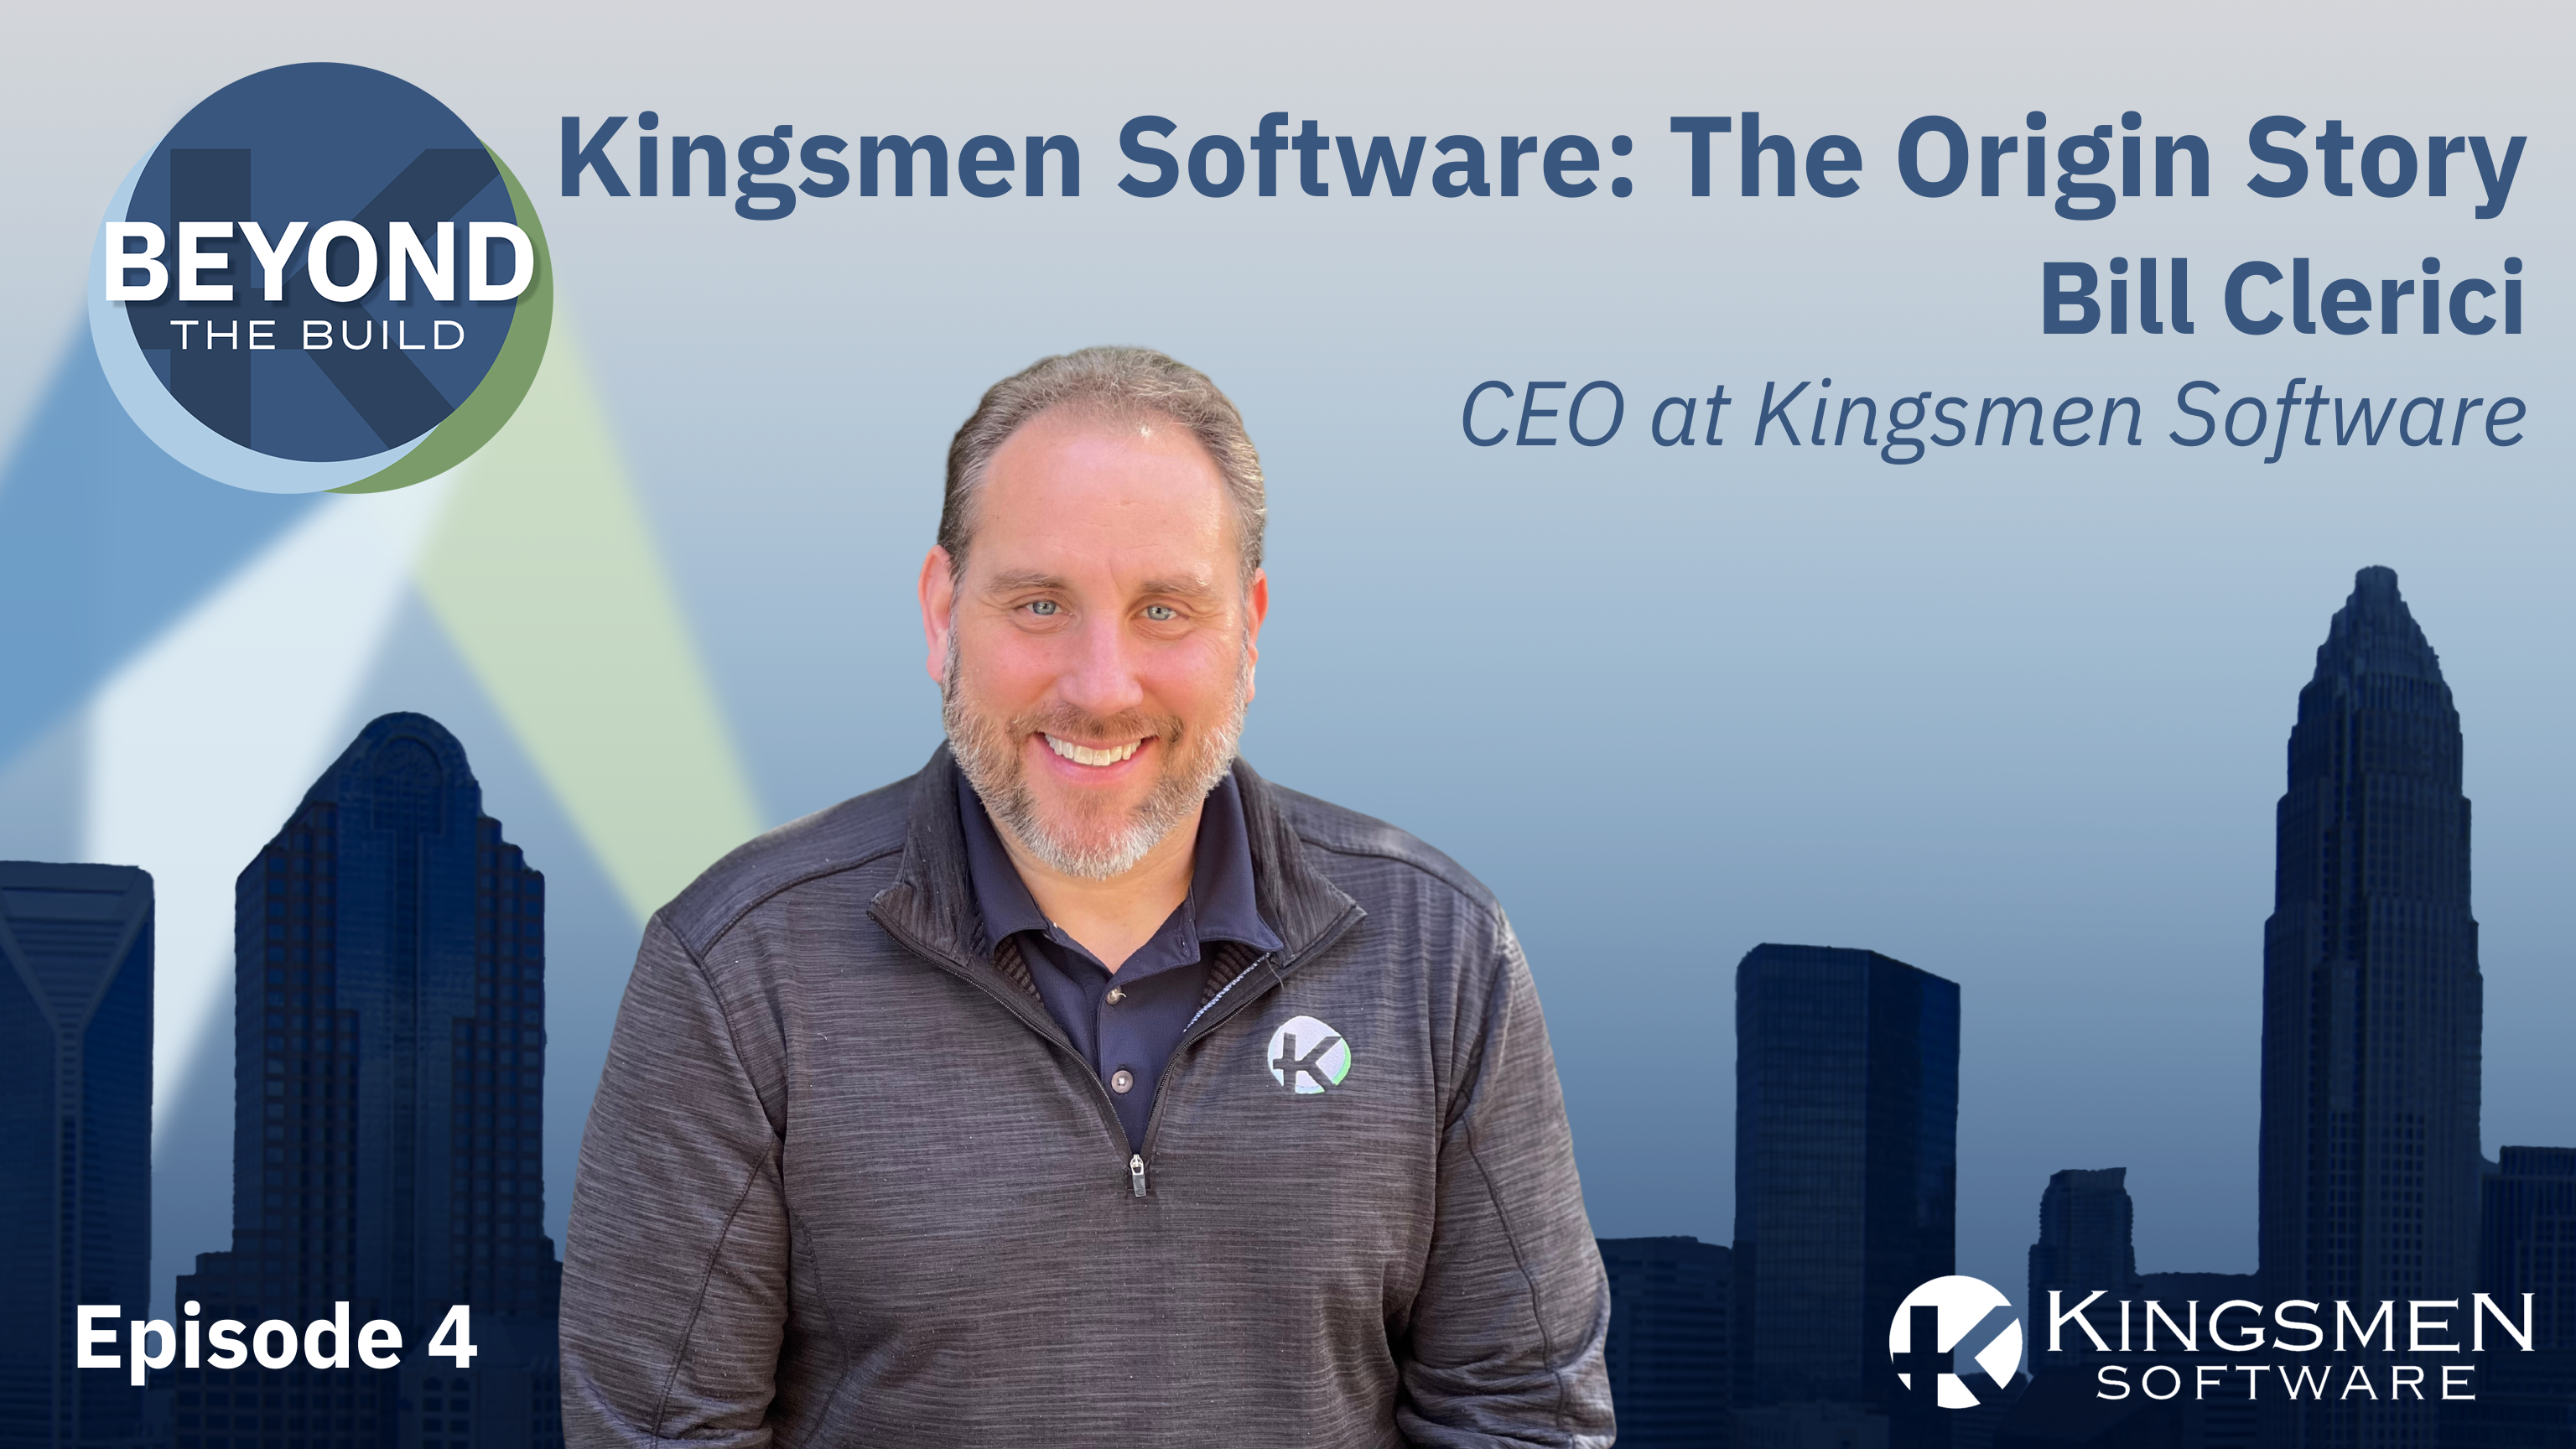 Episode 4: Kingsmen Software - The Origin Story with Bill Clerici